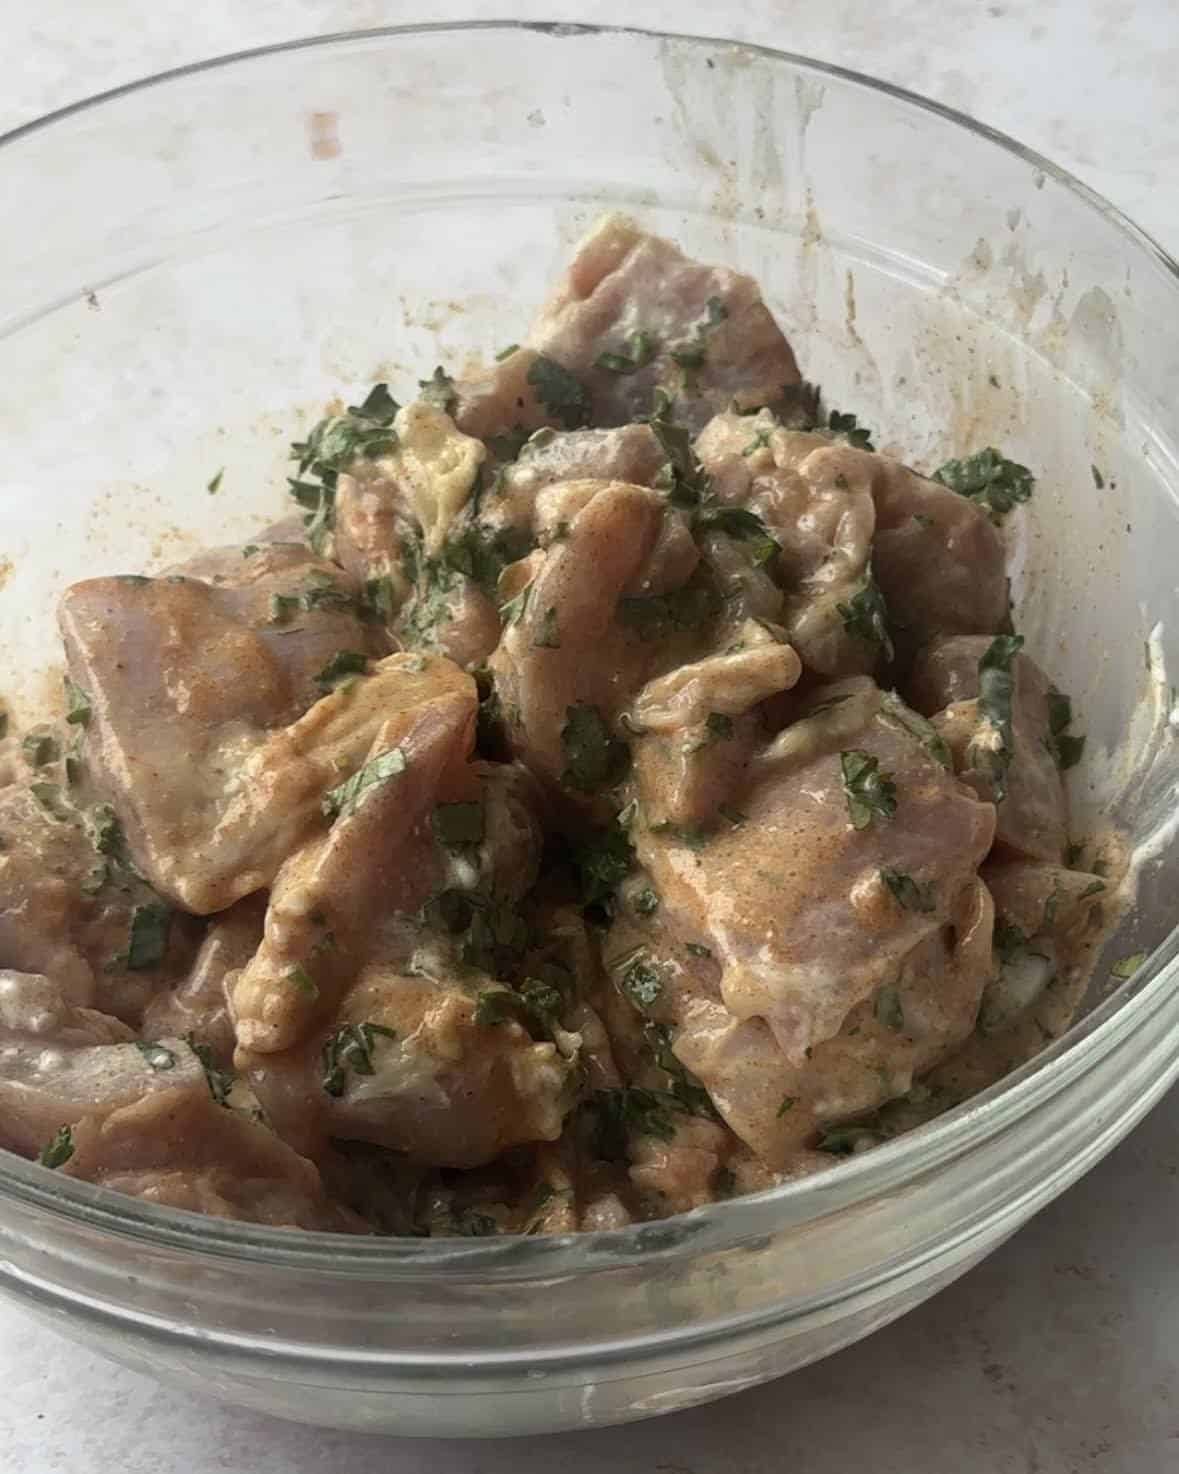 Marinated Mediterranean chicken skewers in a glass bowl. The marinade ingredients, including olive oil, yogurt, lemon juice, tomato paste, parsley, cilantro, cumin, coriander, paprika, salt, and pepper, are visible on top of the chicken cubes. 